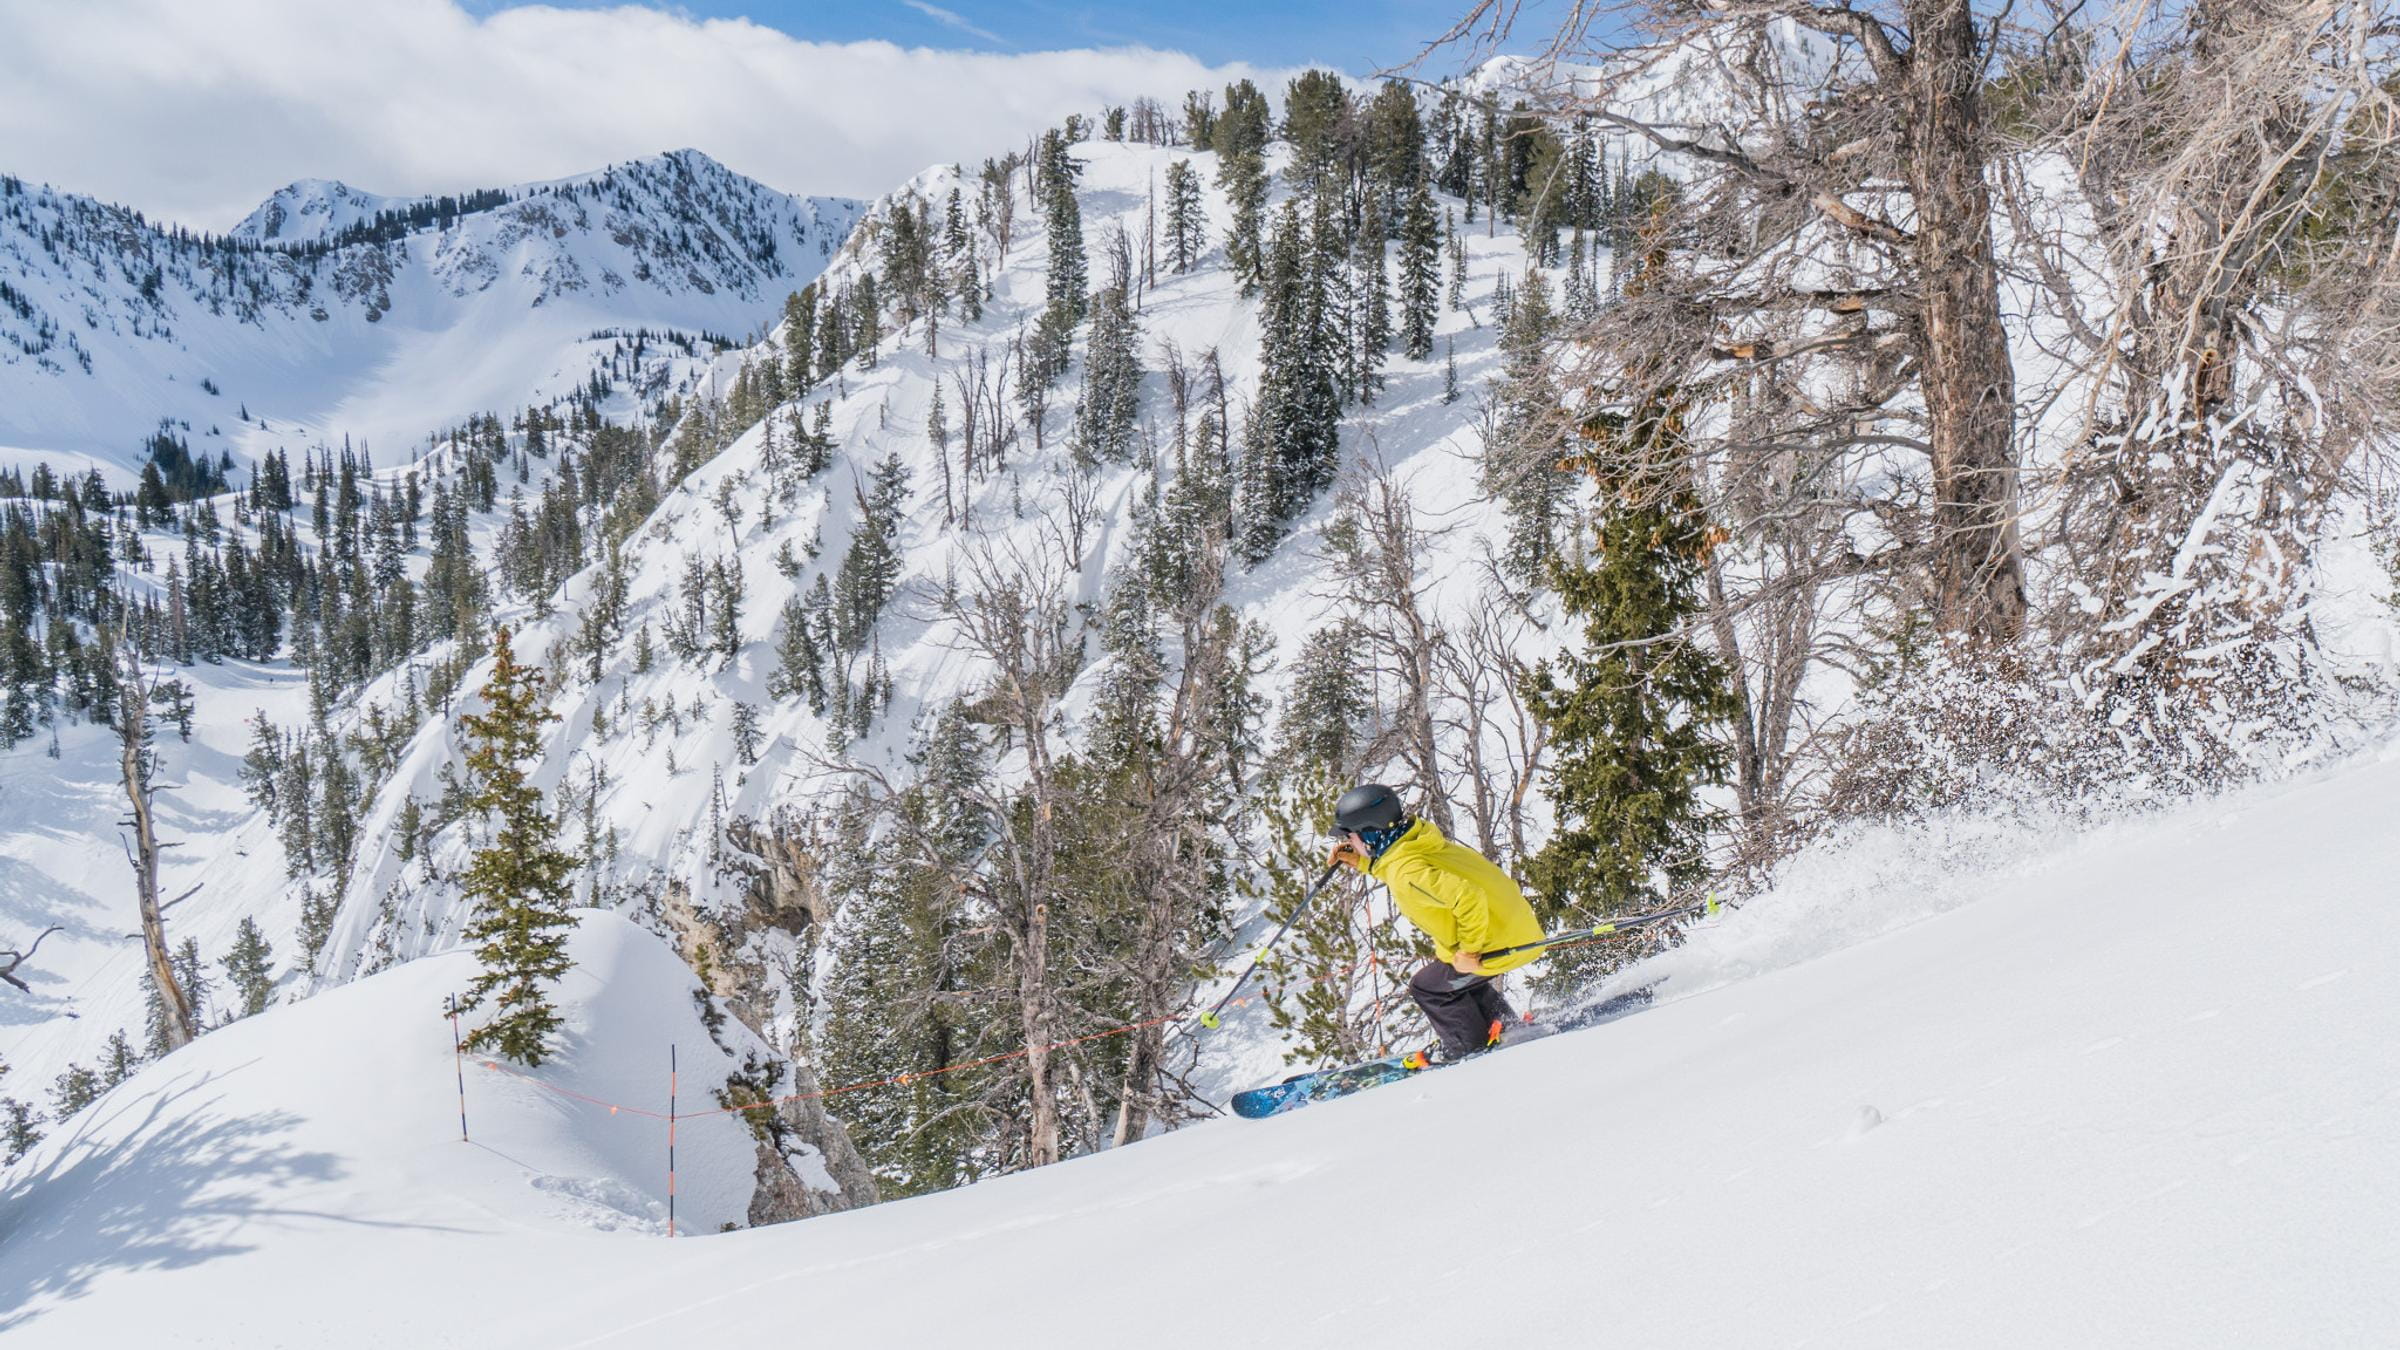 Skier on a sunny day at Solitude Mountain Resort